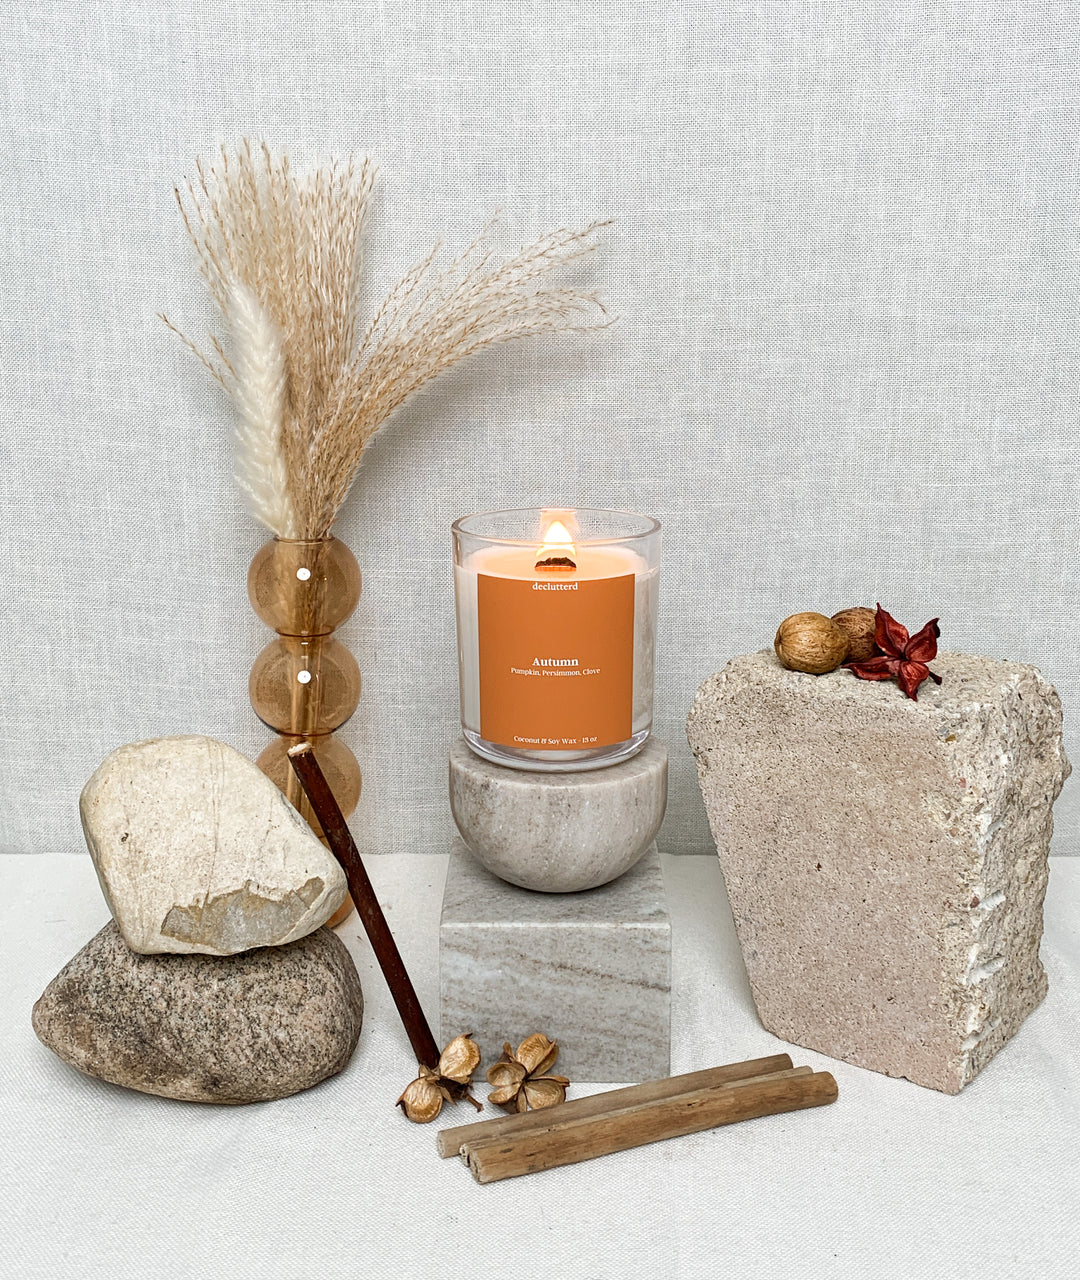 Autumn Wood Wick Candle, Lifestyle